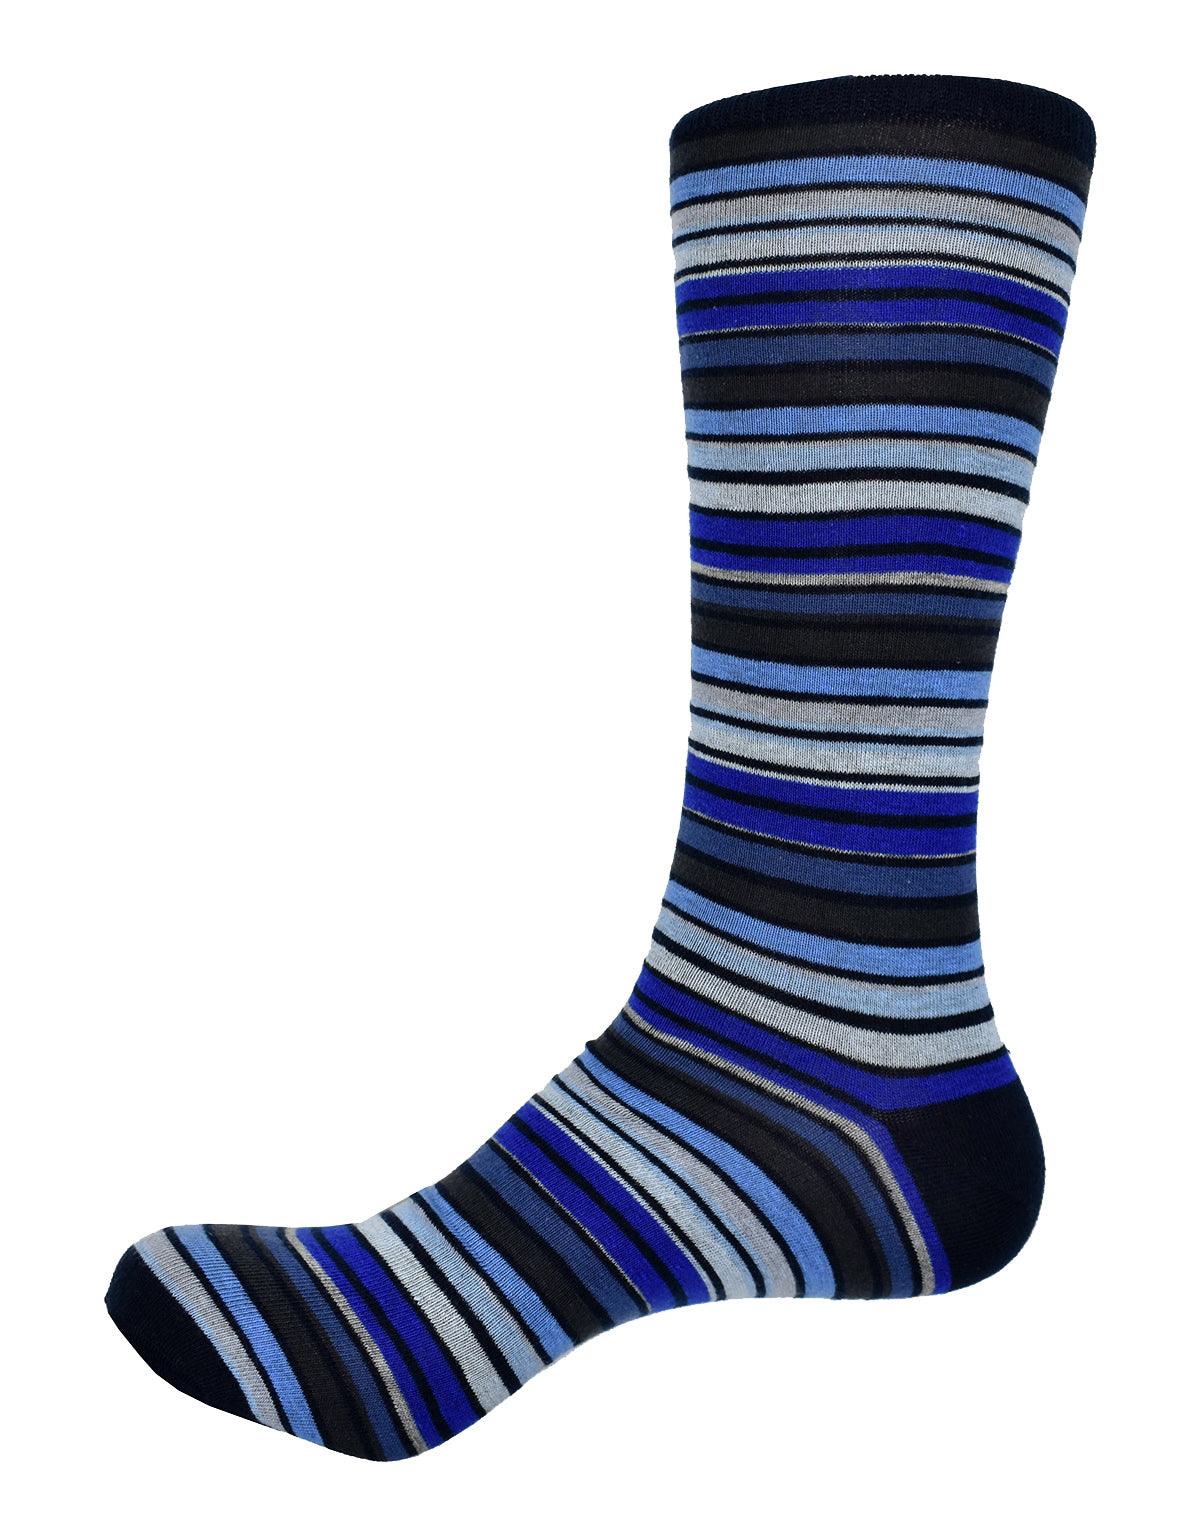 Add a great look to your outfit with these navy toned multi socks.  The perfect complement to your jeans.  Soft mercerized cotton. Above the calf style. Fits sizes 9-13.